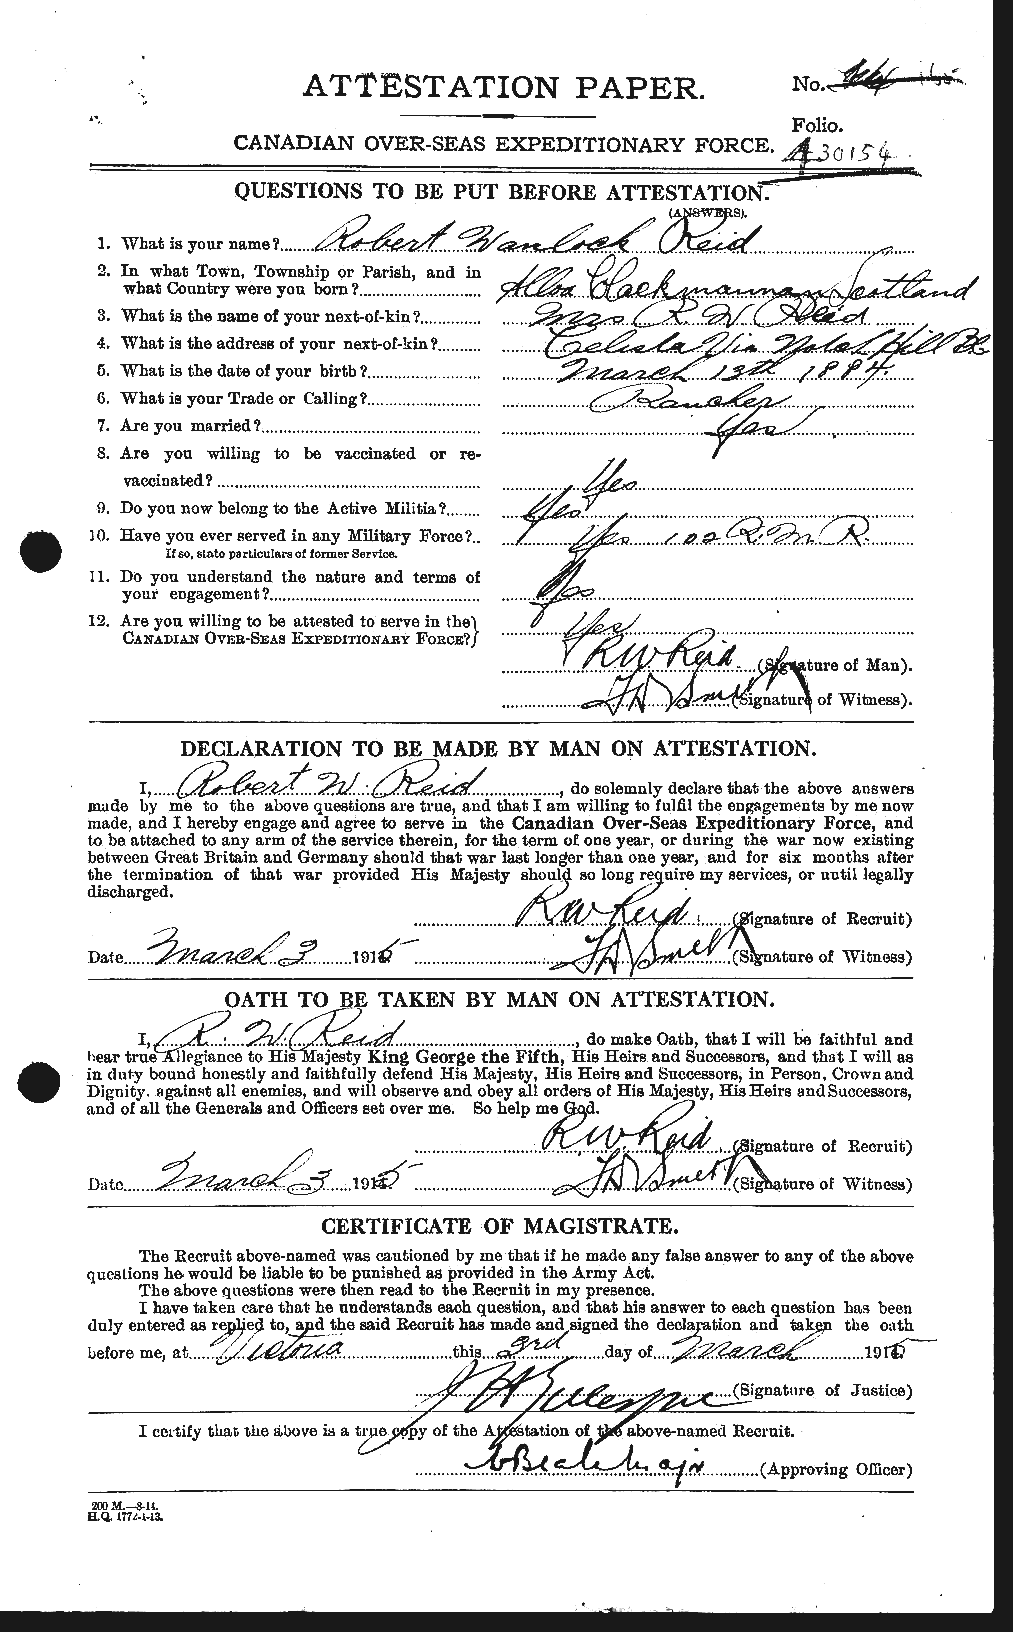 Personnel Records of the First World War - CEF 601926a